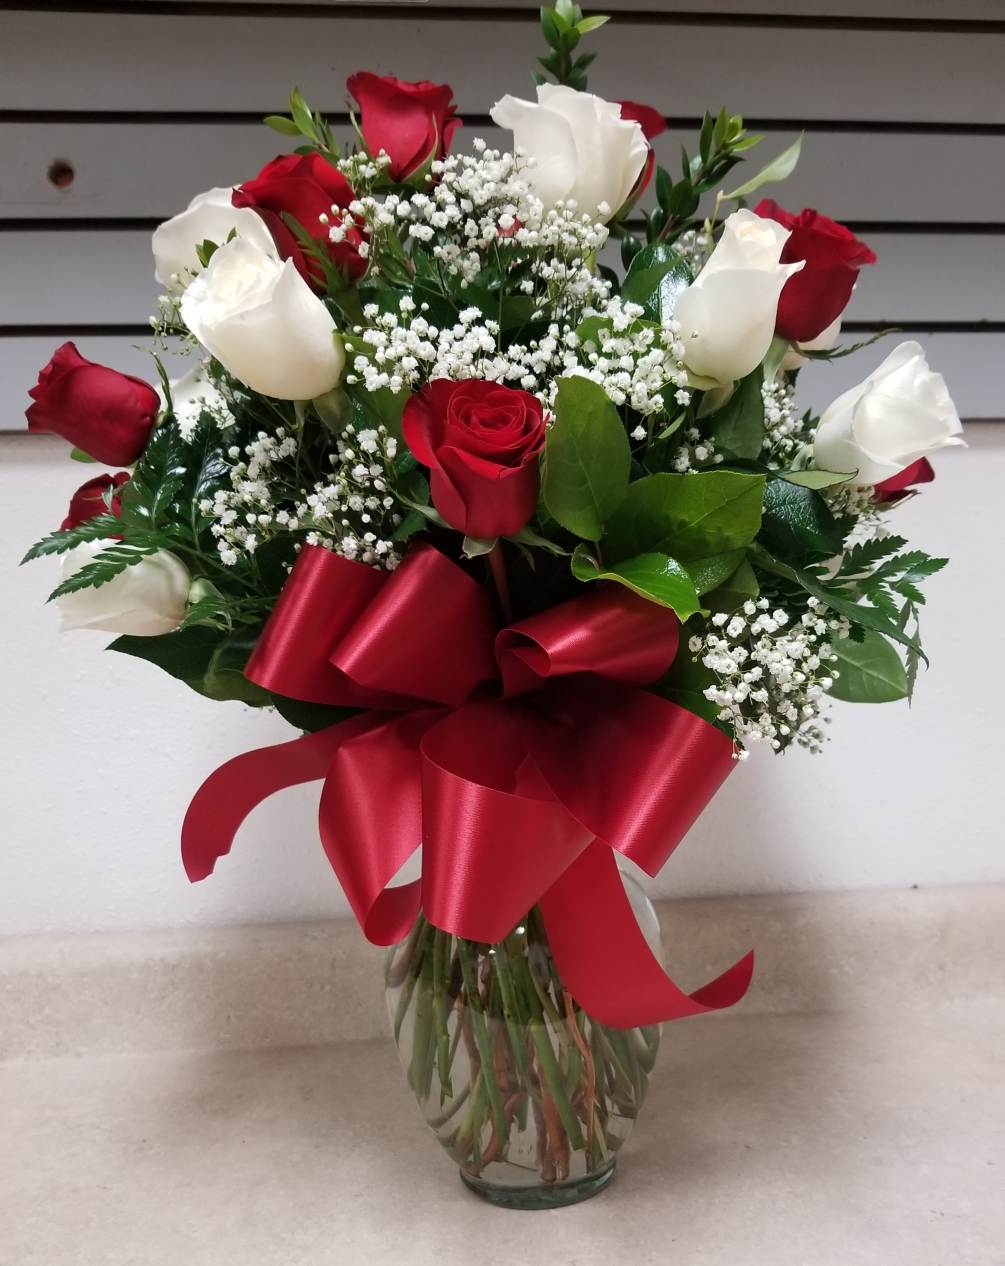 Beautiful red and white roses for a very specia love one.